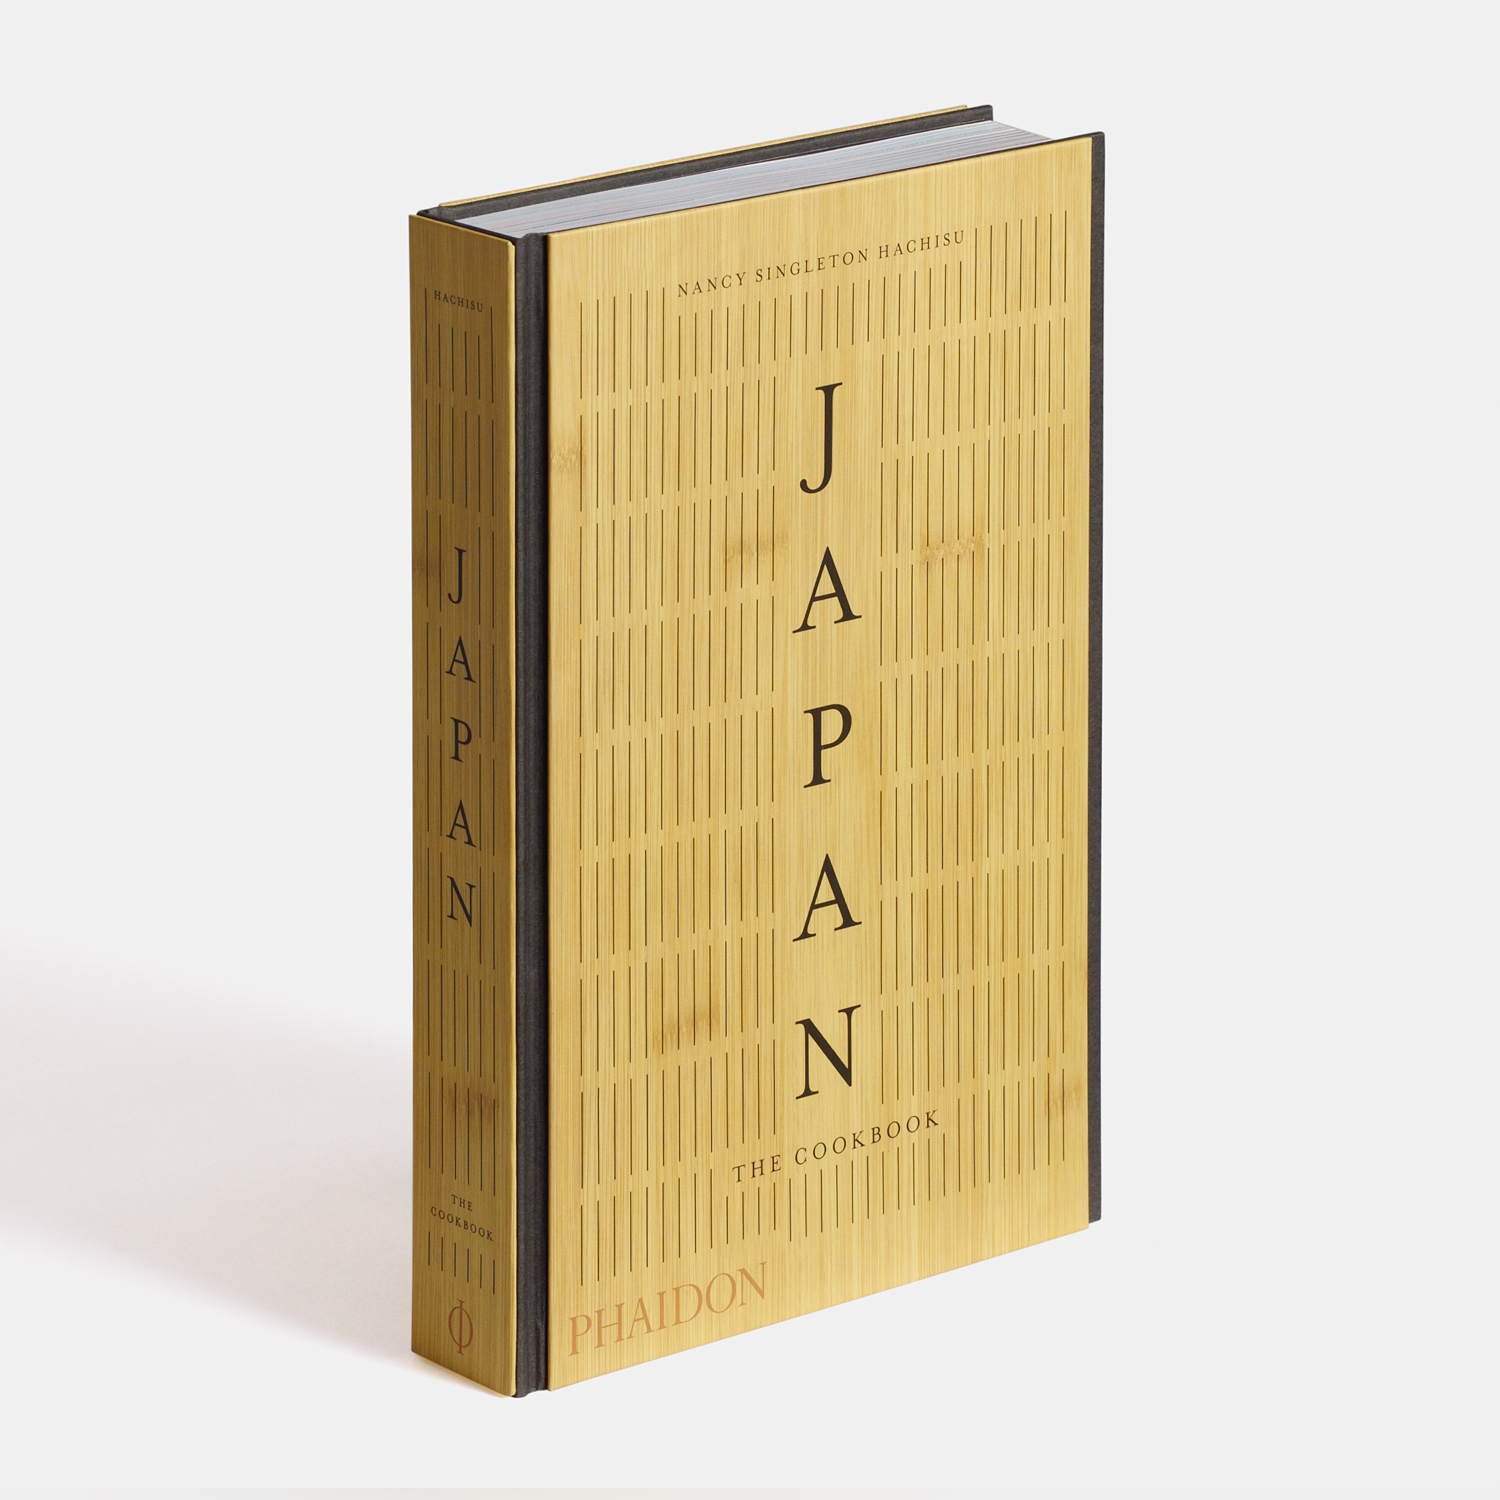 Japan: The Cookbook, a winning book at last night's D&AD awards